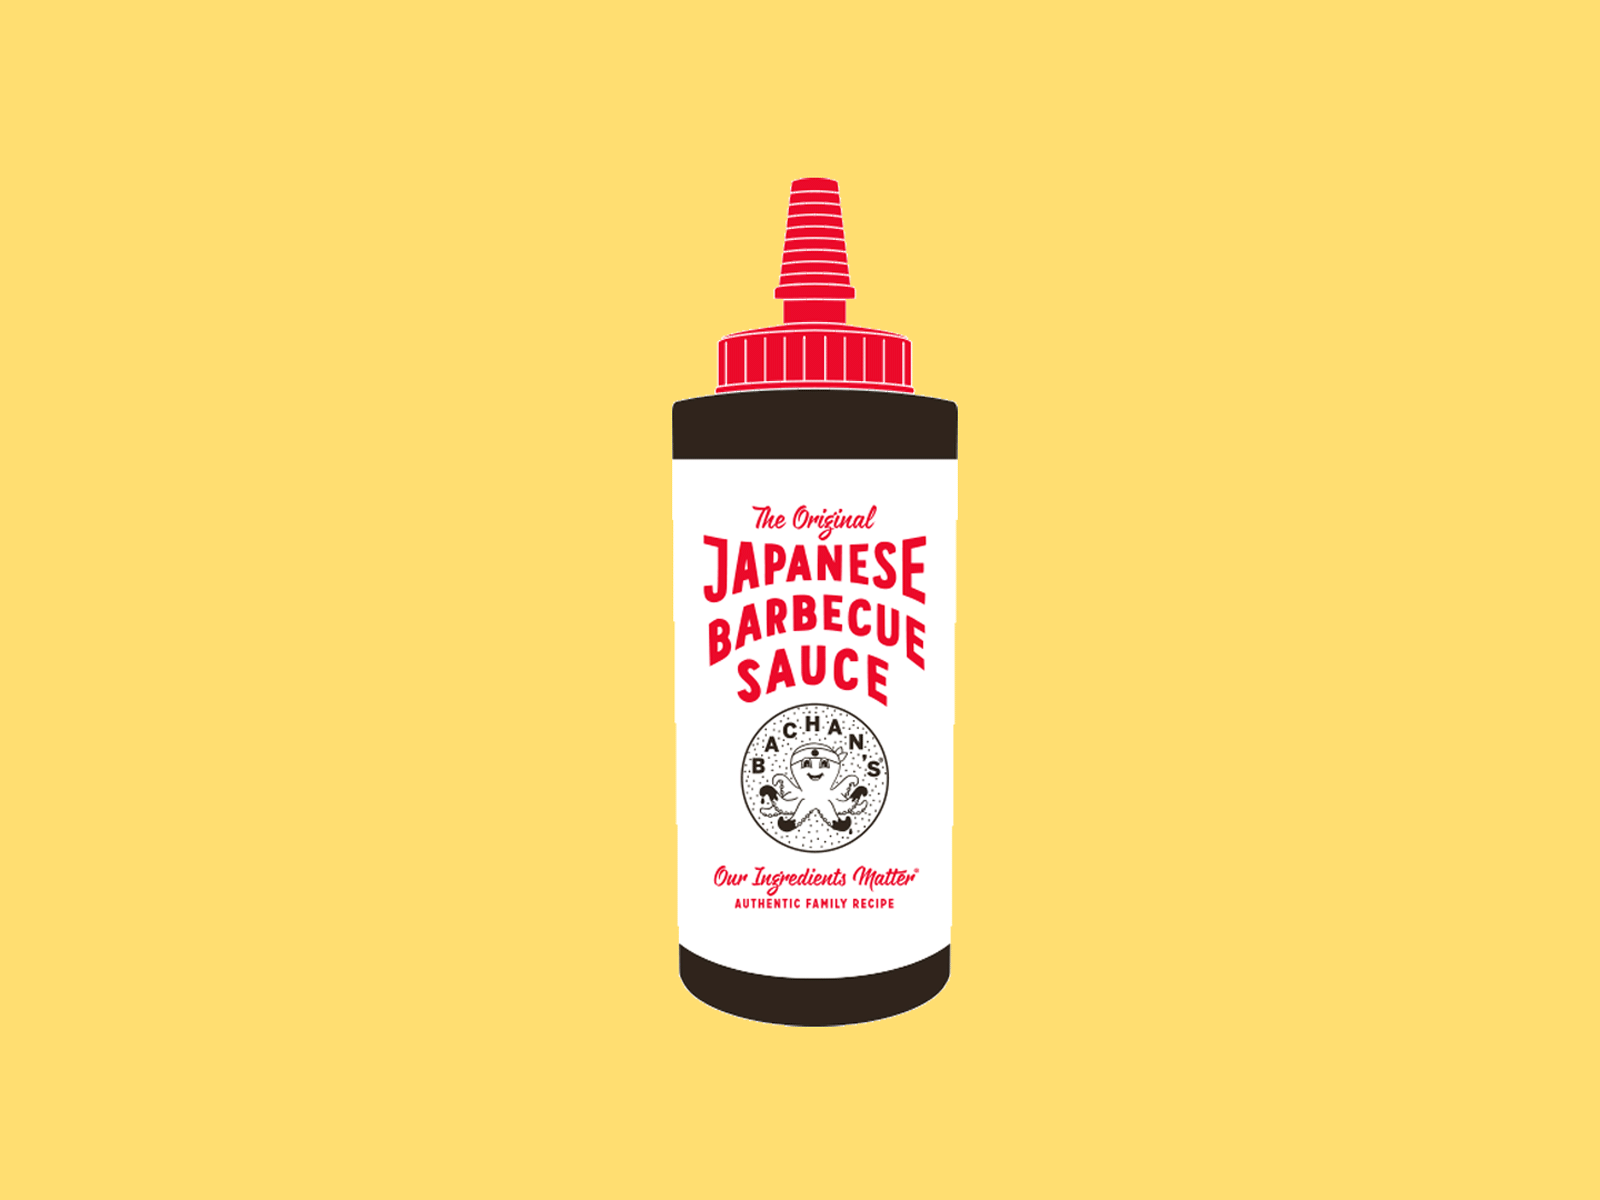 Bachan's Japanese Barbecue Sauce